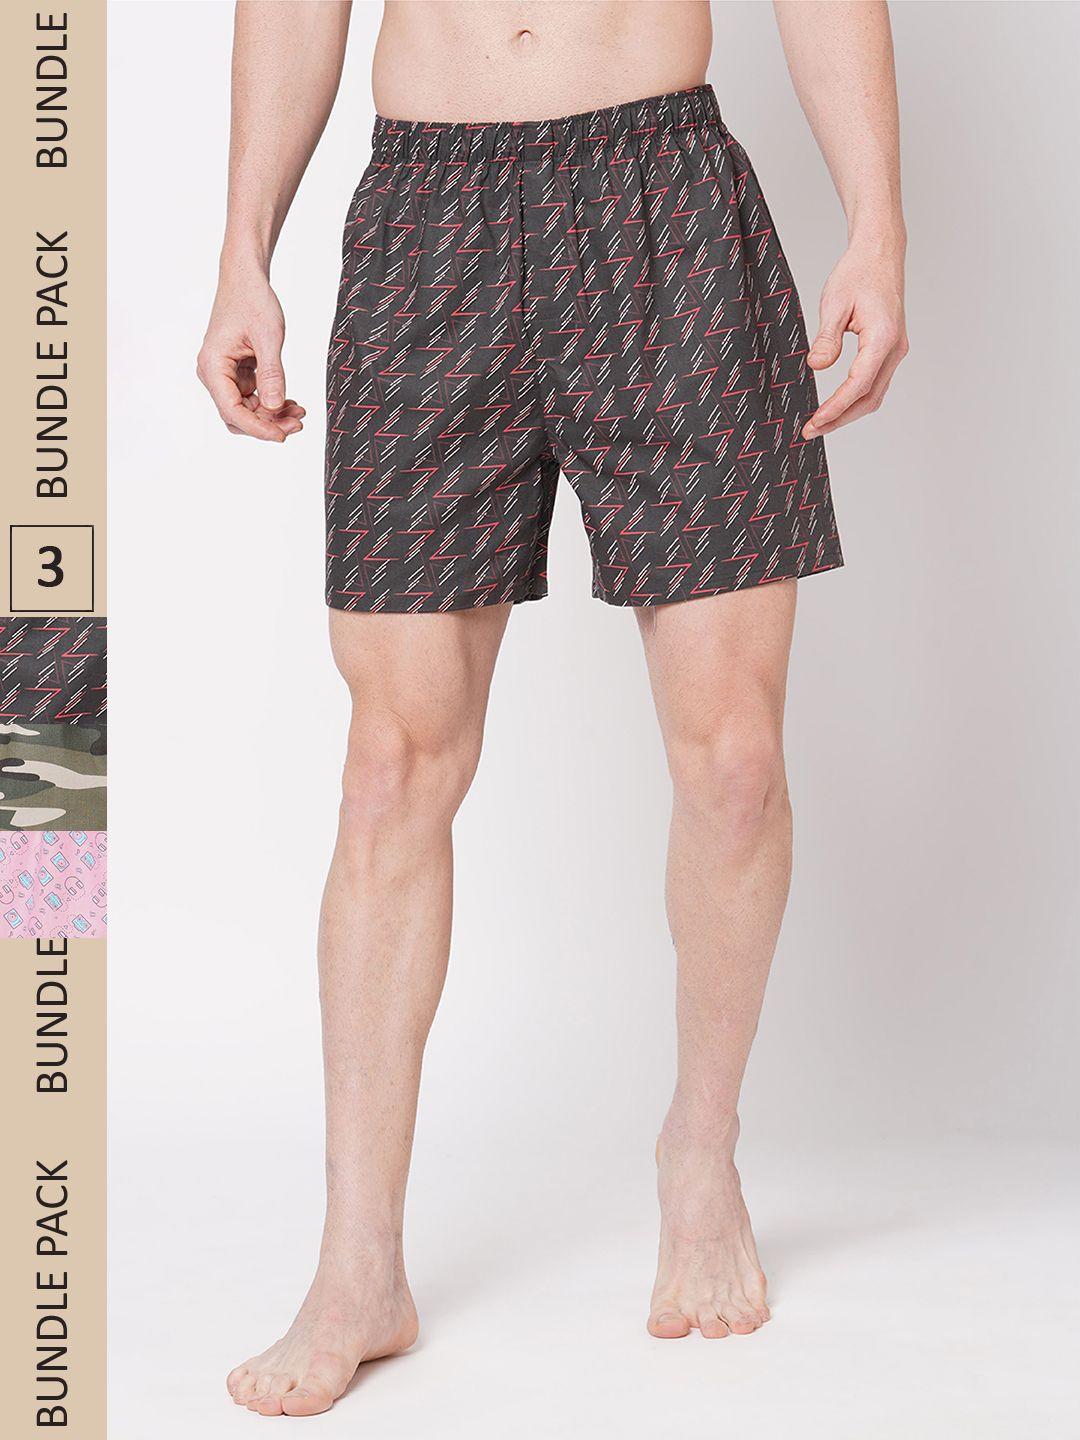 fitz-men-pack-of-3-printed-cotton-boxers-aw22-so-65pebkywpi-1796-m